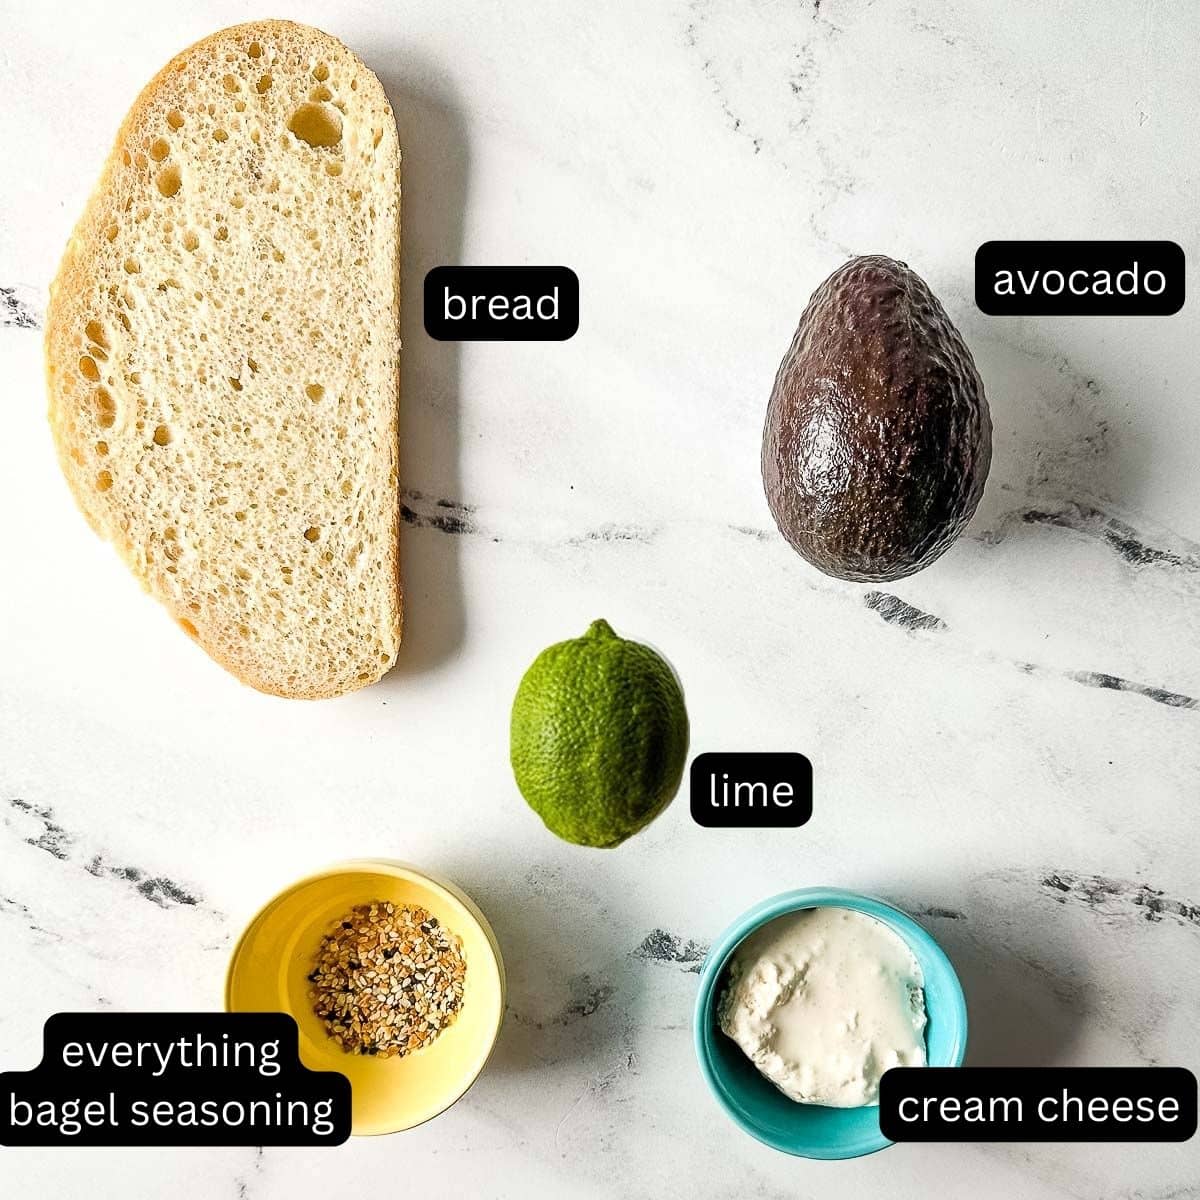 the labeled ingredients for the avocado tartine sit on a white marble counter.